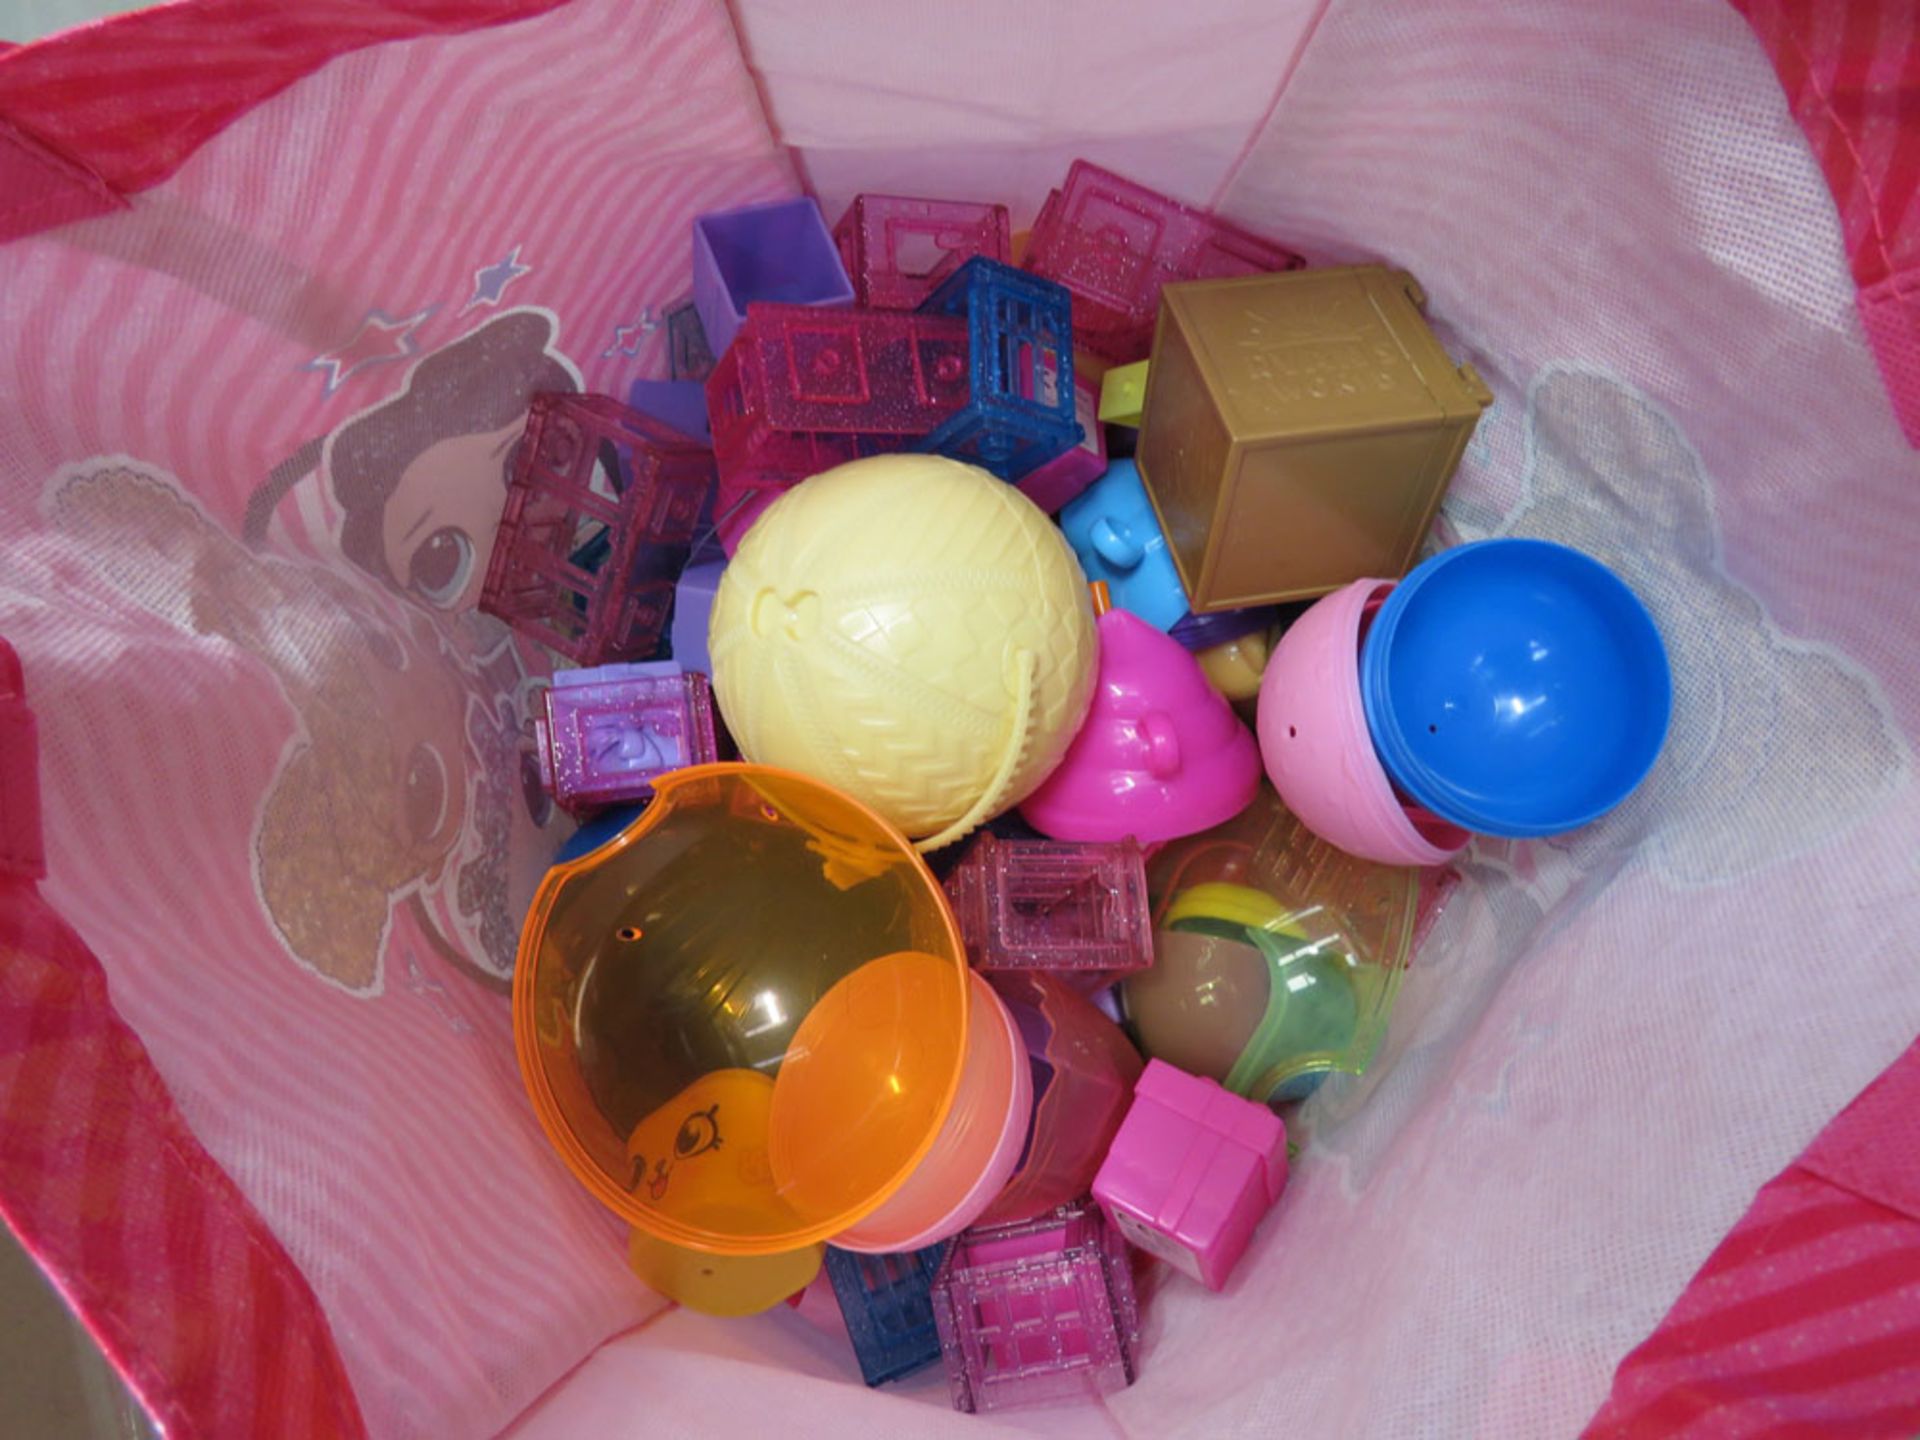 Bag containing loose kids toys